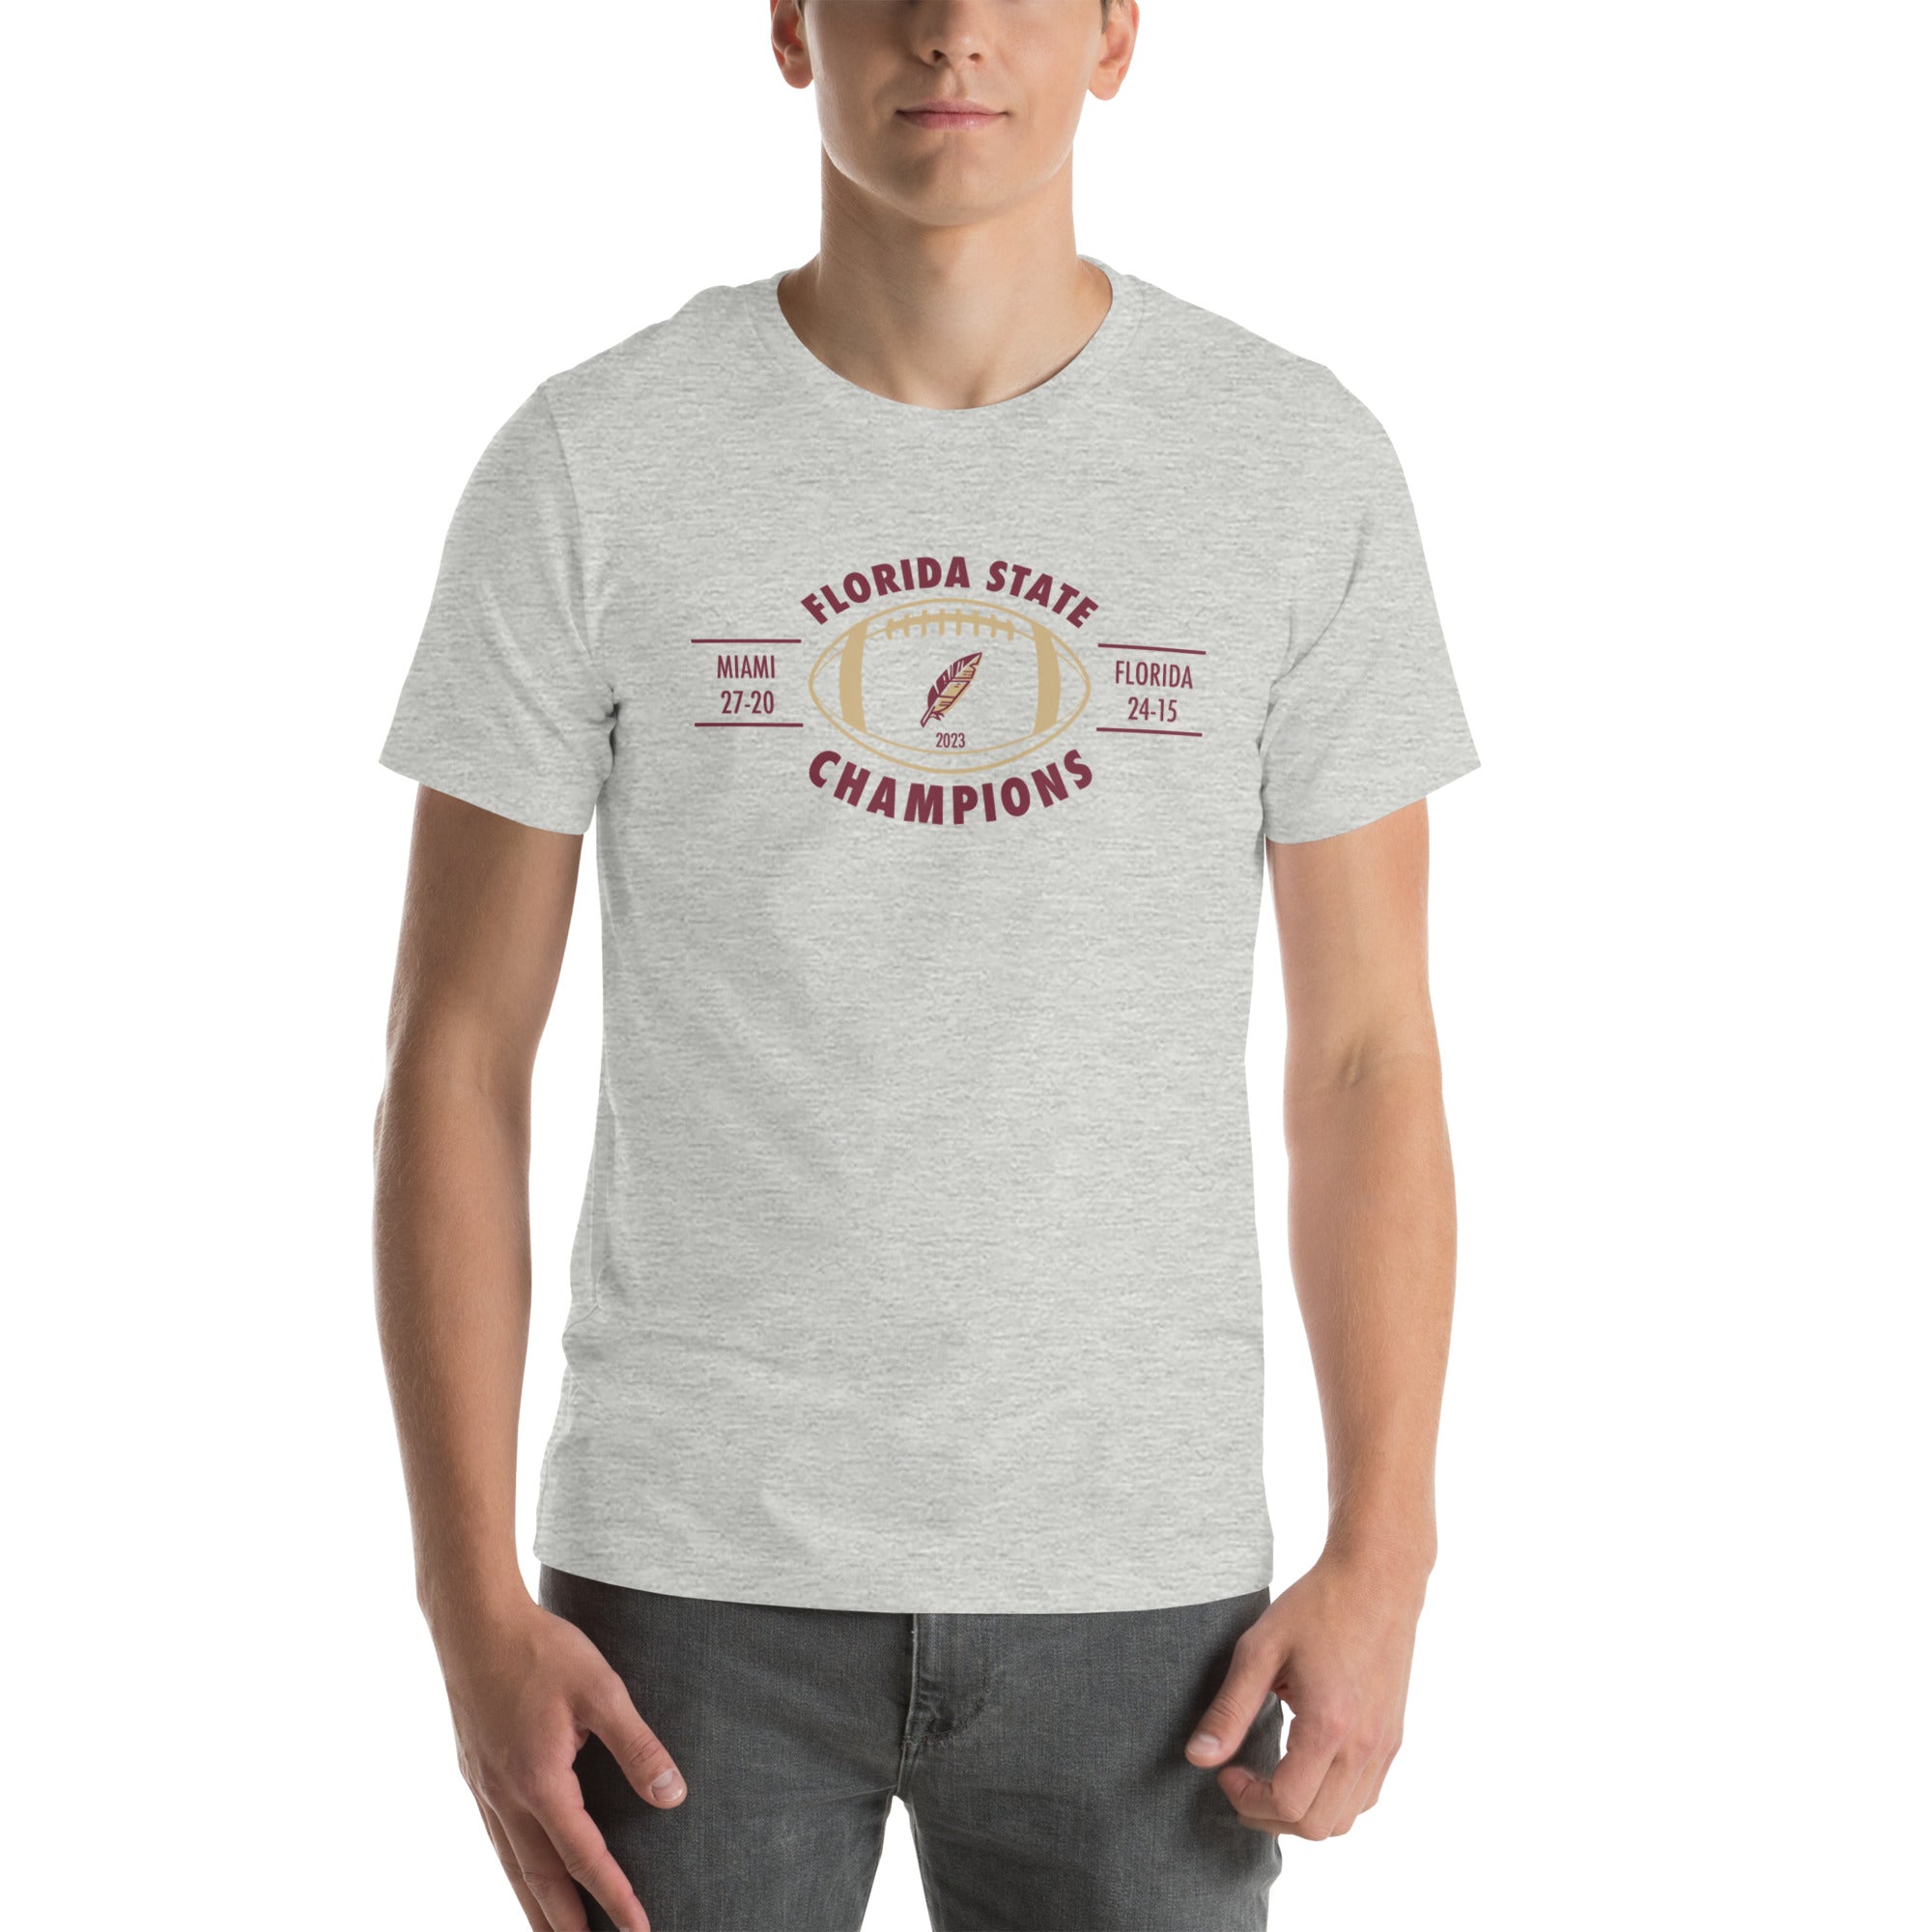 2023 Florida State Champs Unisex T-shirt